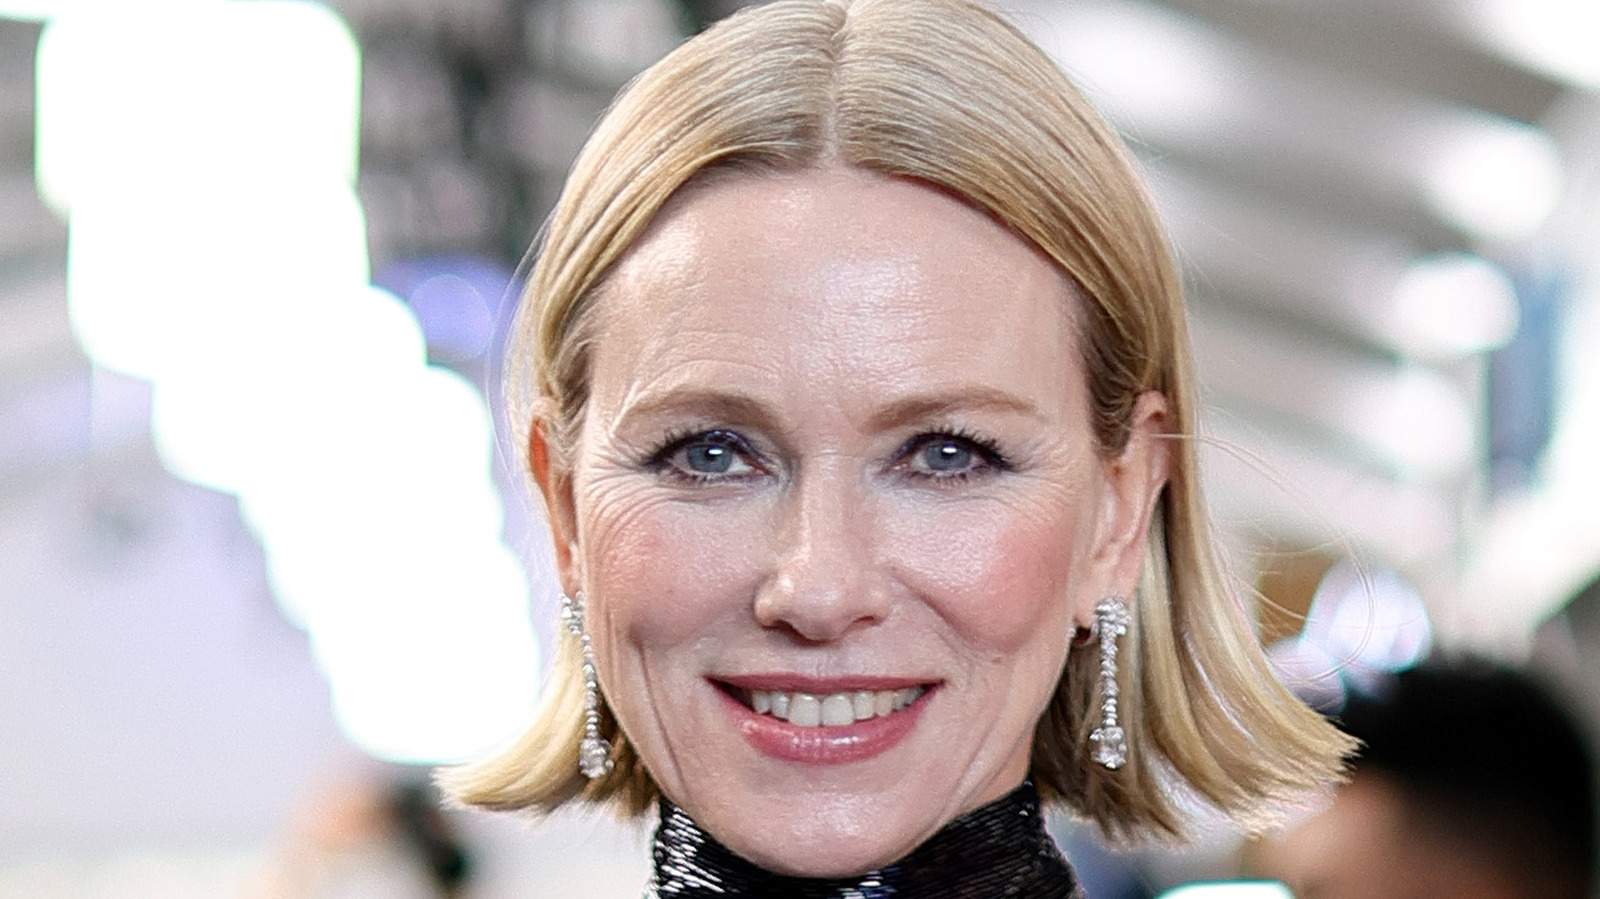 Naomi Watts Describes The Physical And Emotional Challenges Of The